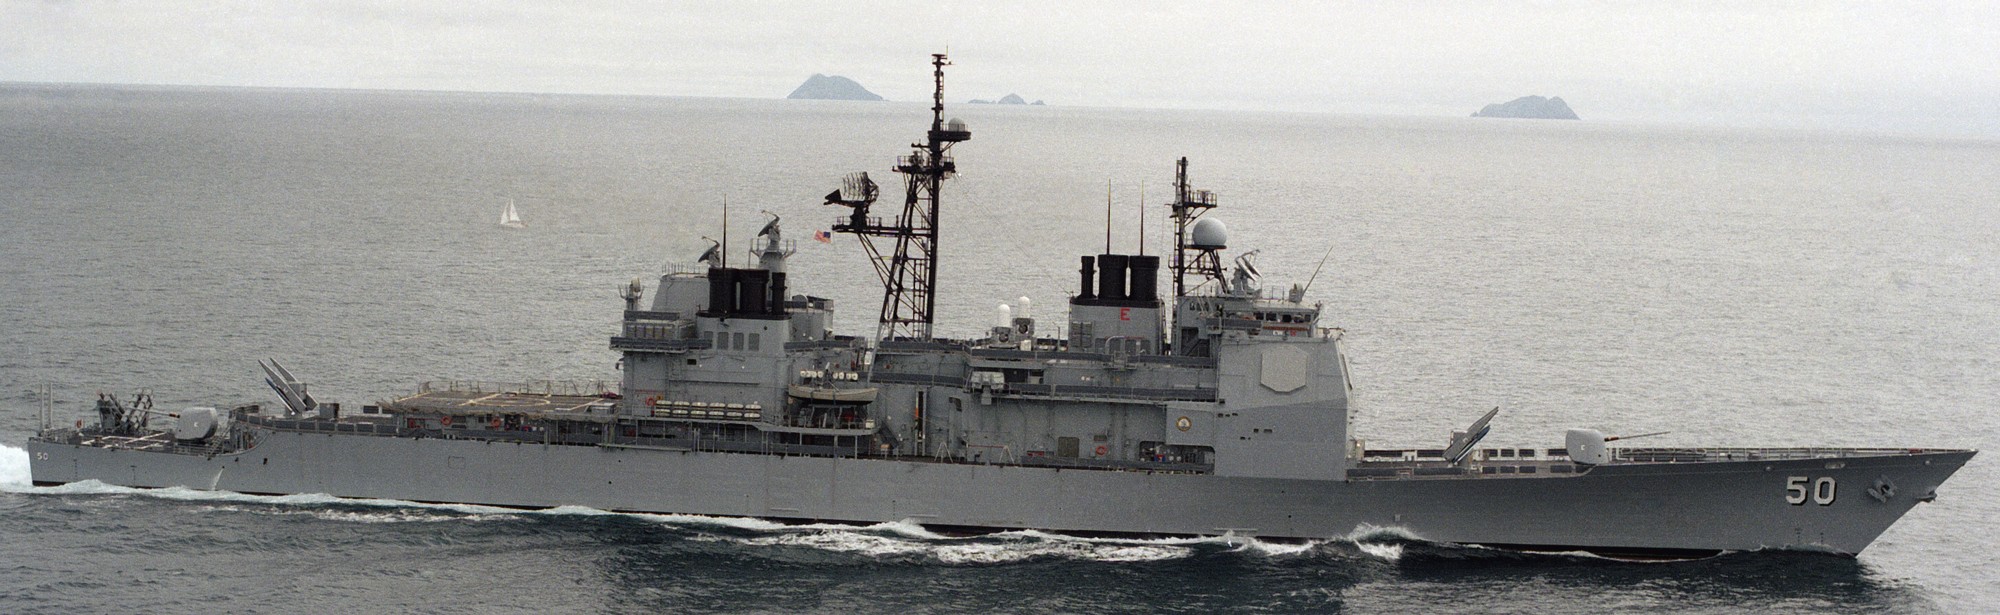 cg-50 uss valley forge ticonderoga class guided missile cruiser aegis us navy 33